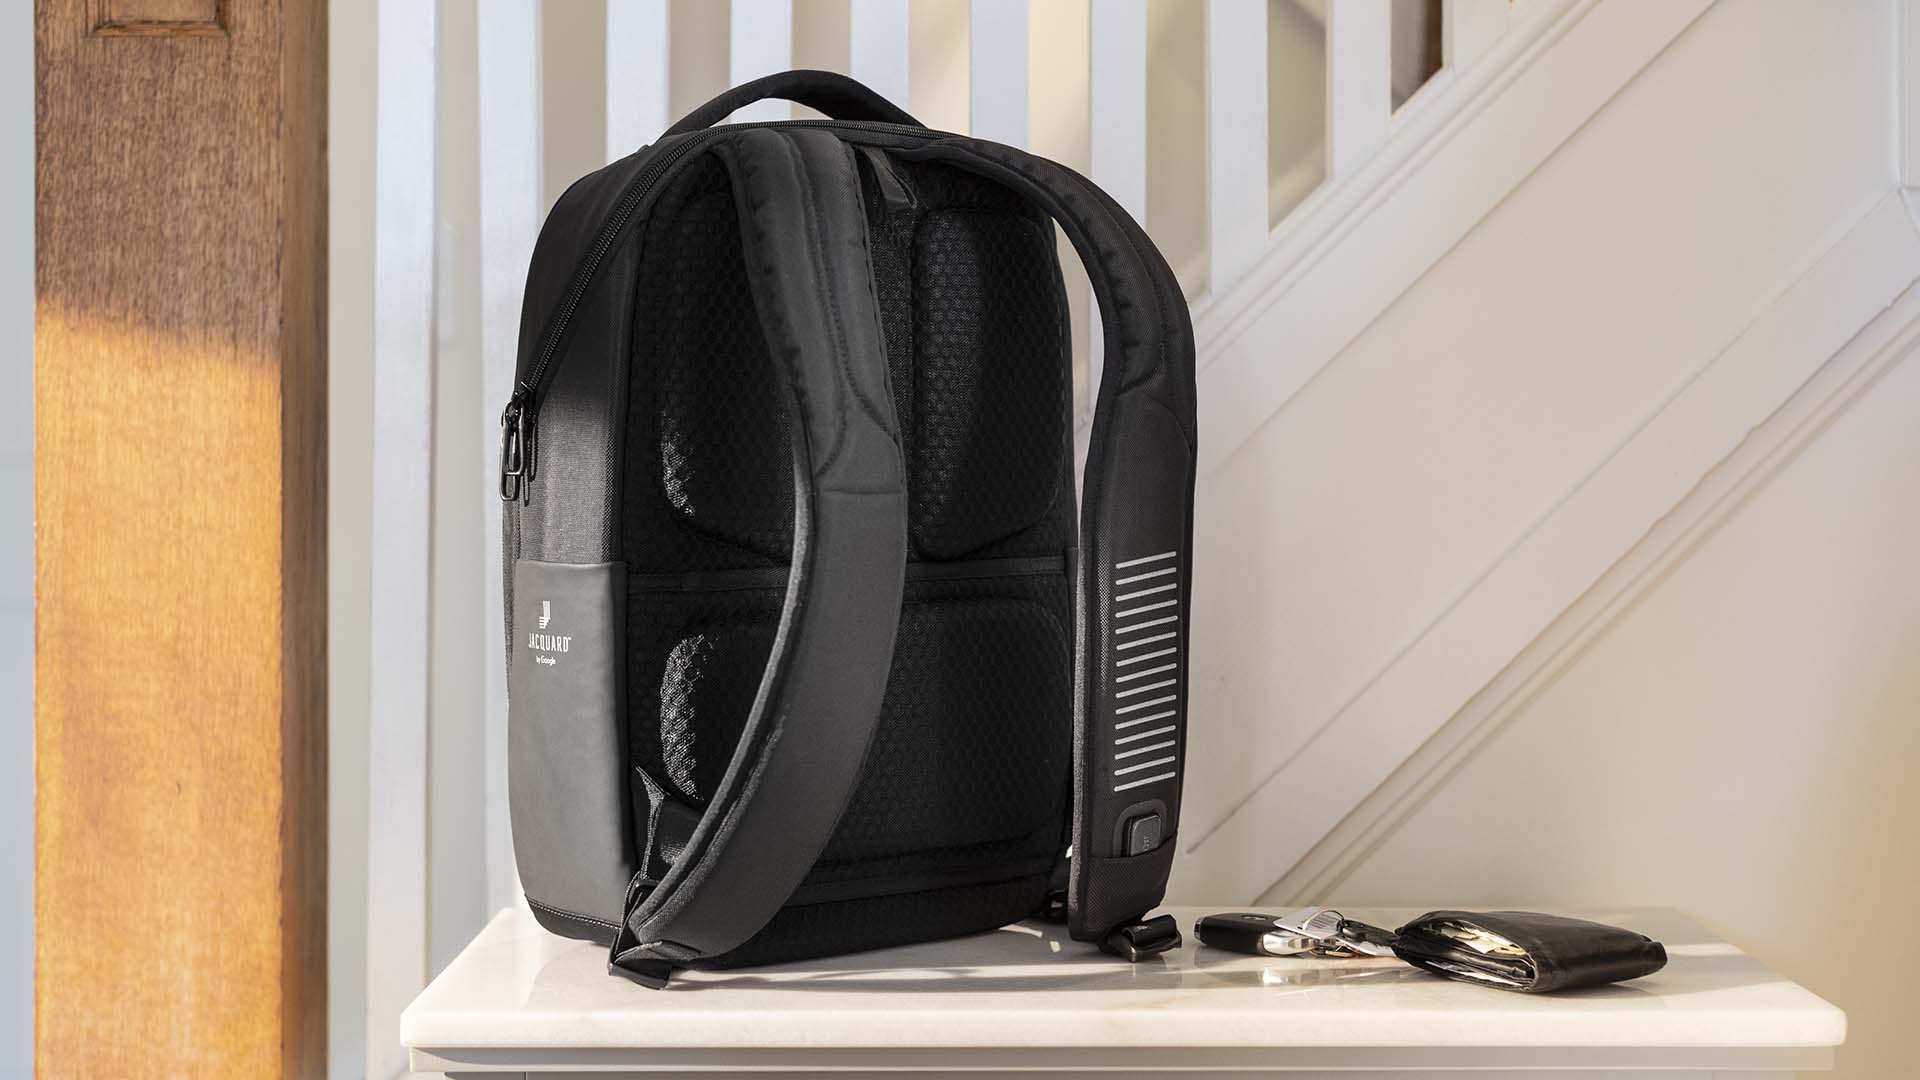 This Futuristic Samsonite Backpack Lets You Controls Your Smartphone via Strap Taps